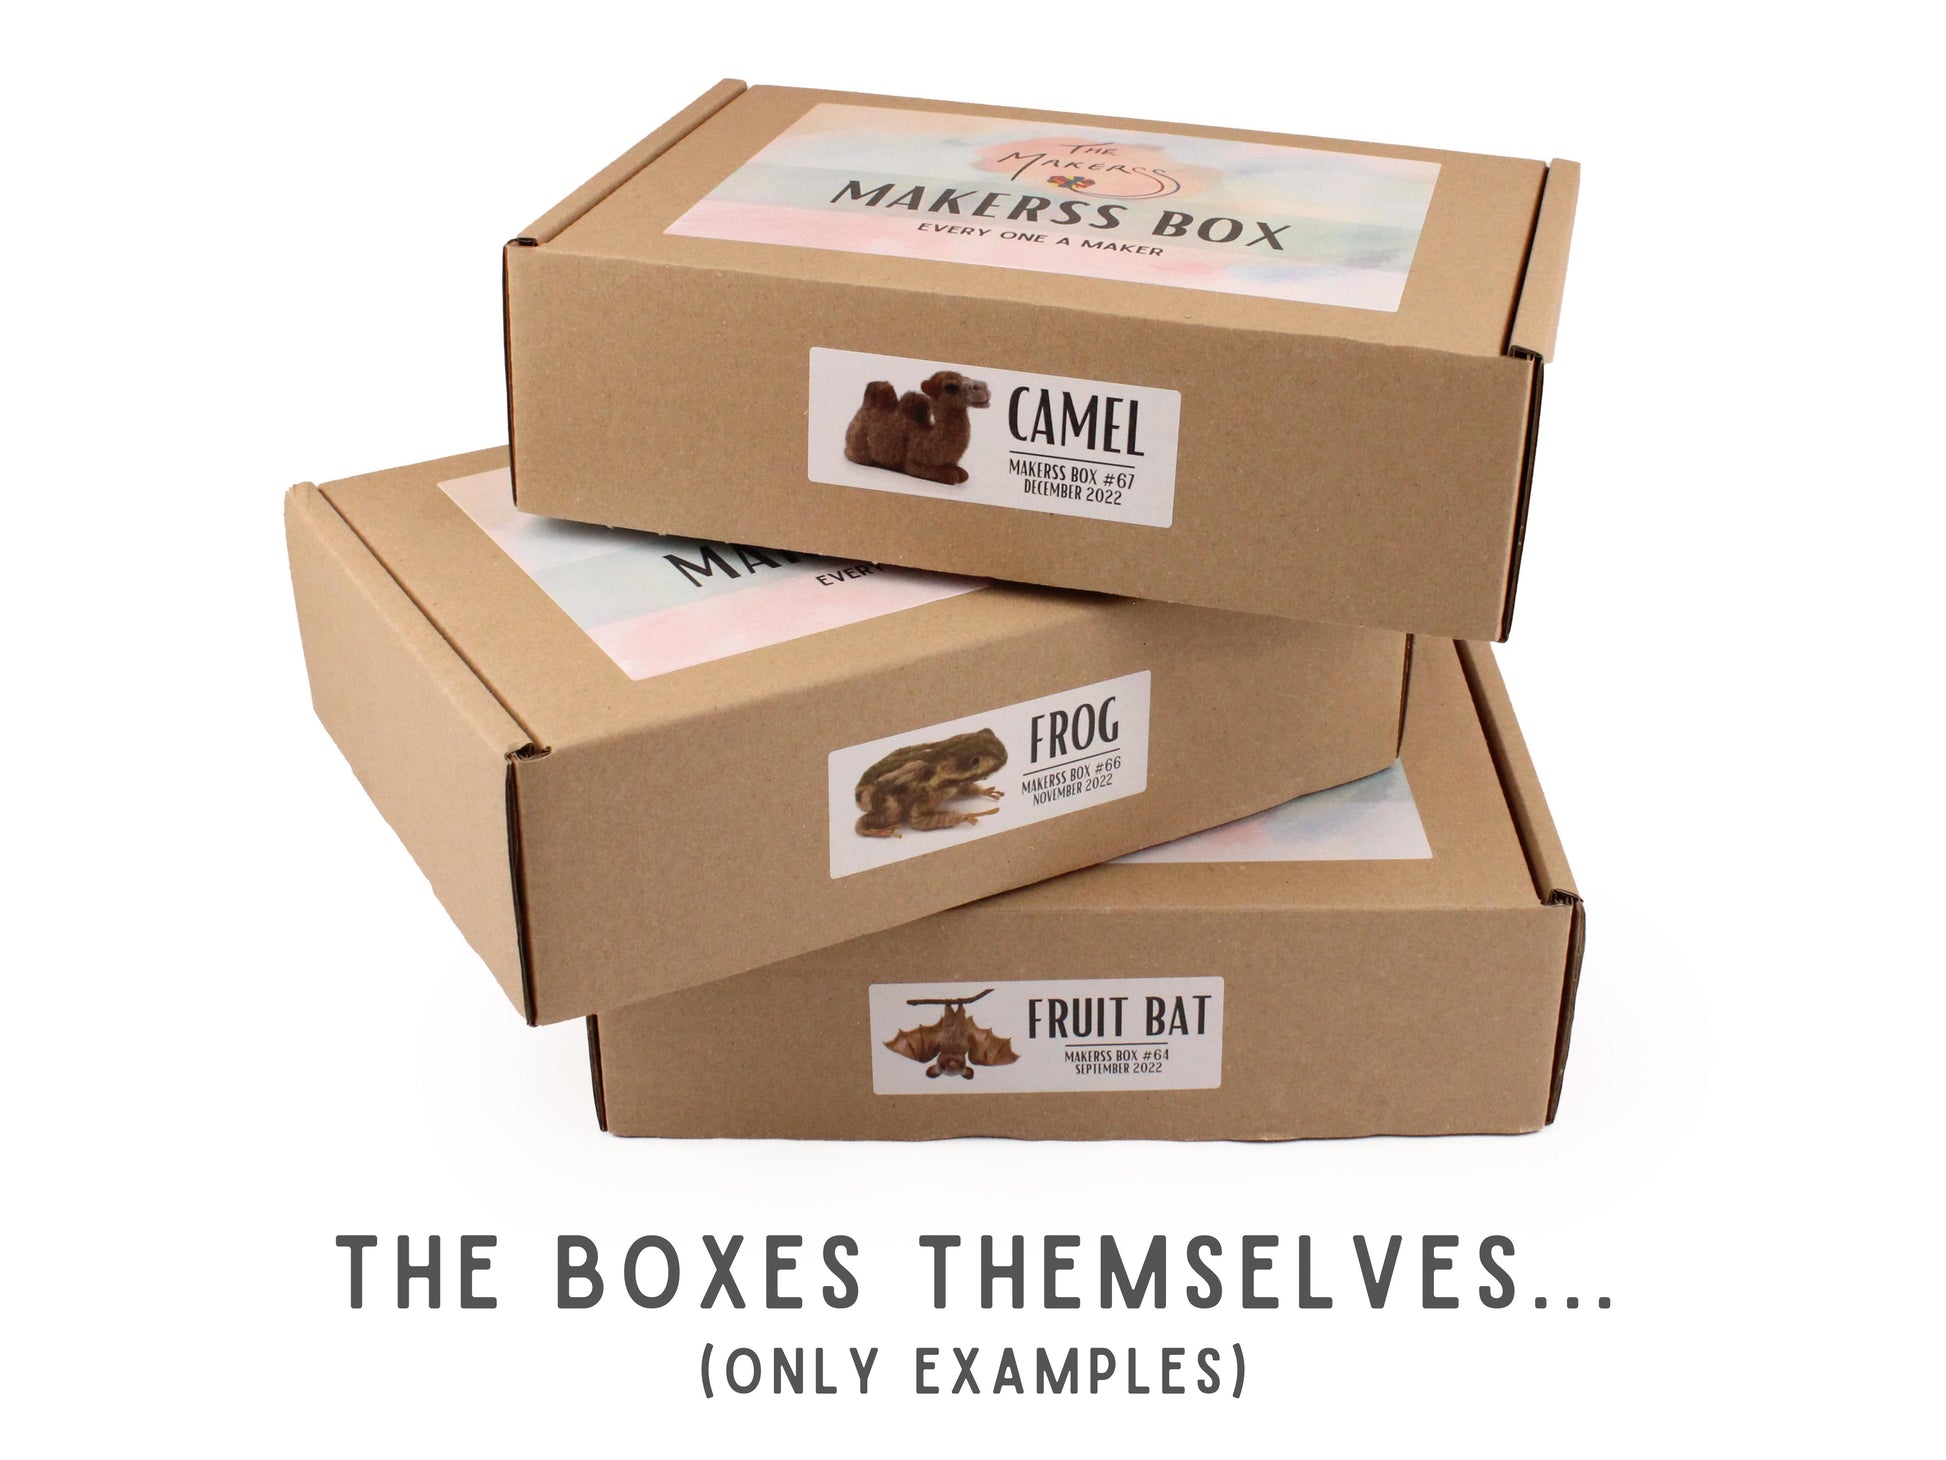 Gift Subscription - Makerss Box - The Makerss